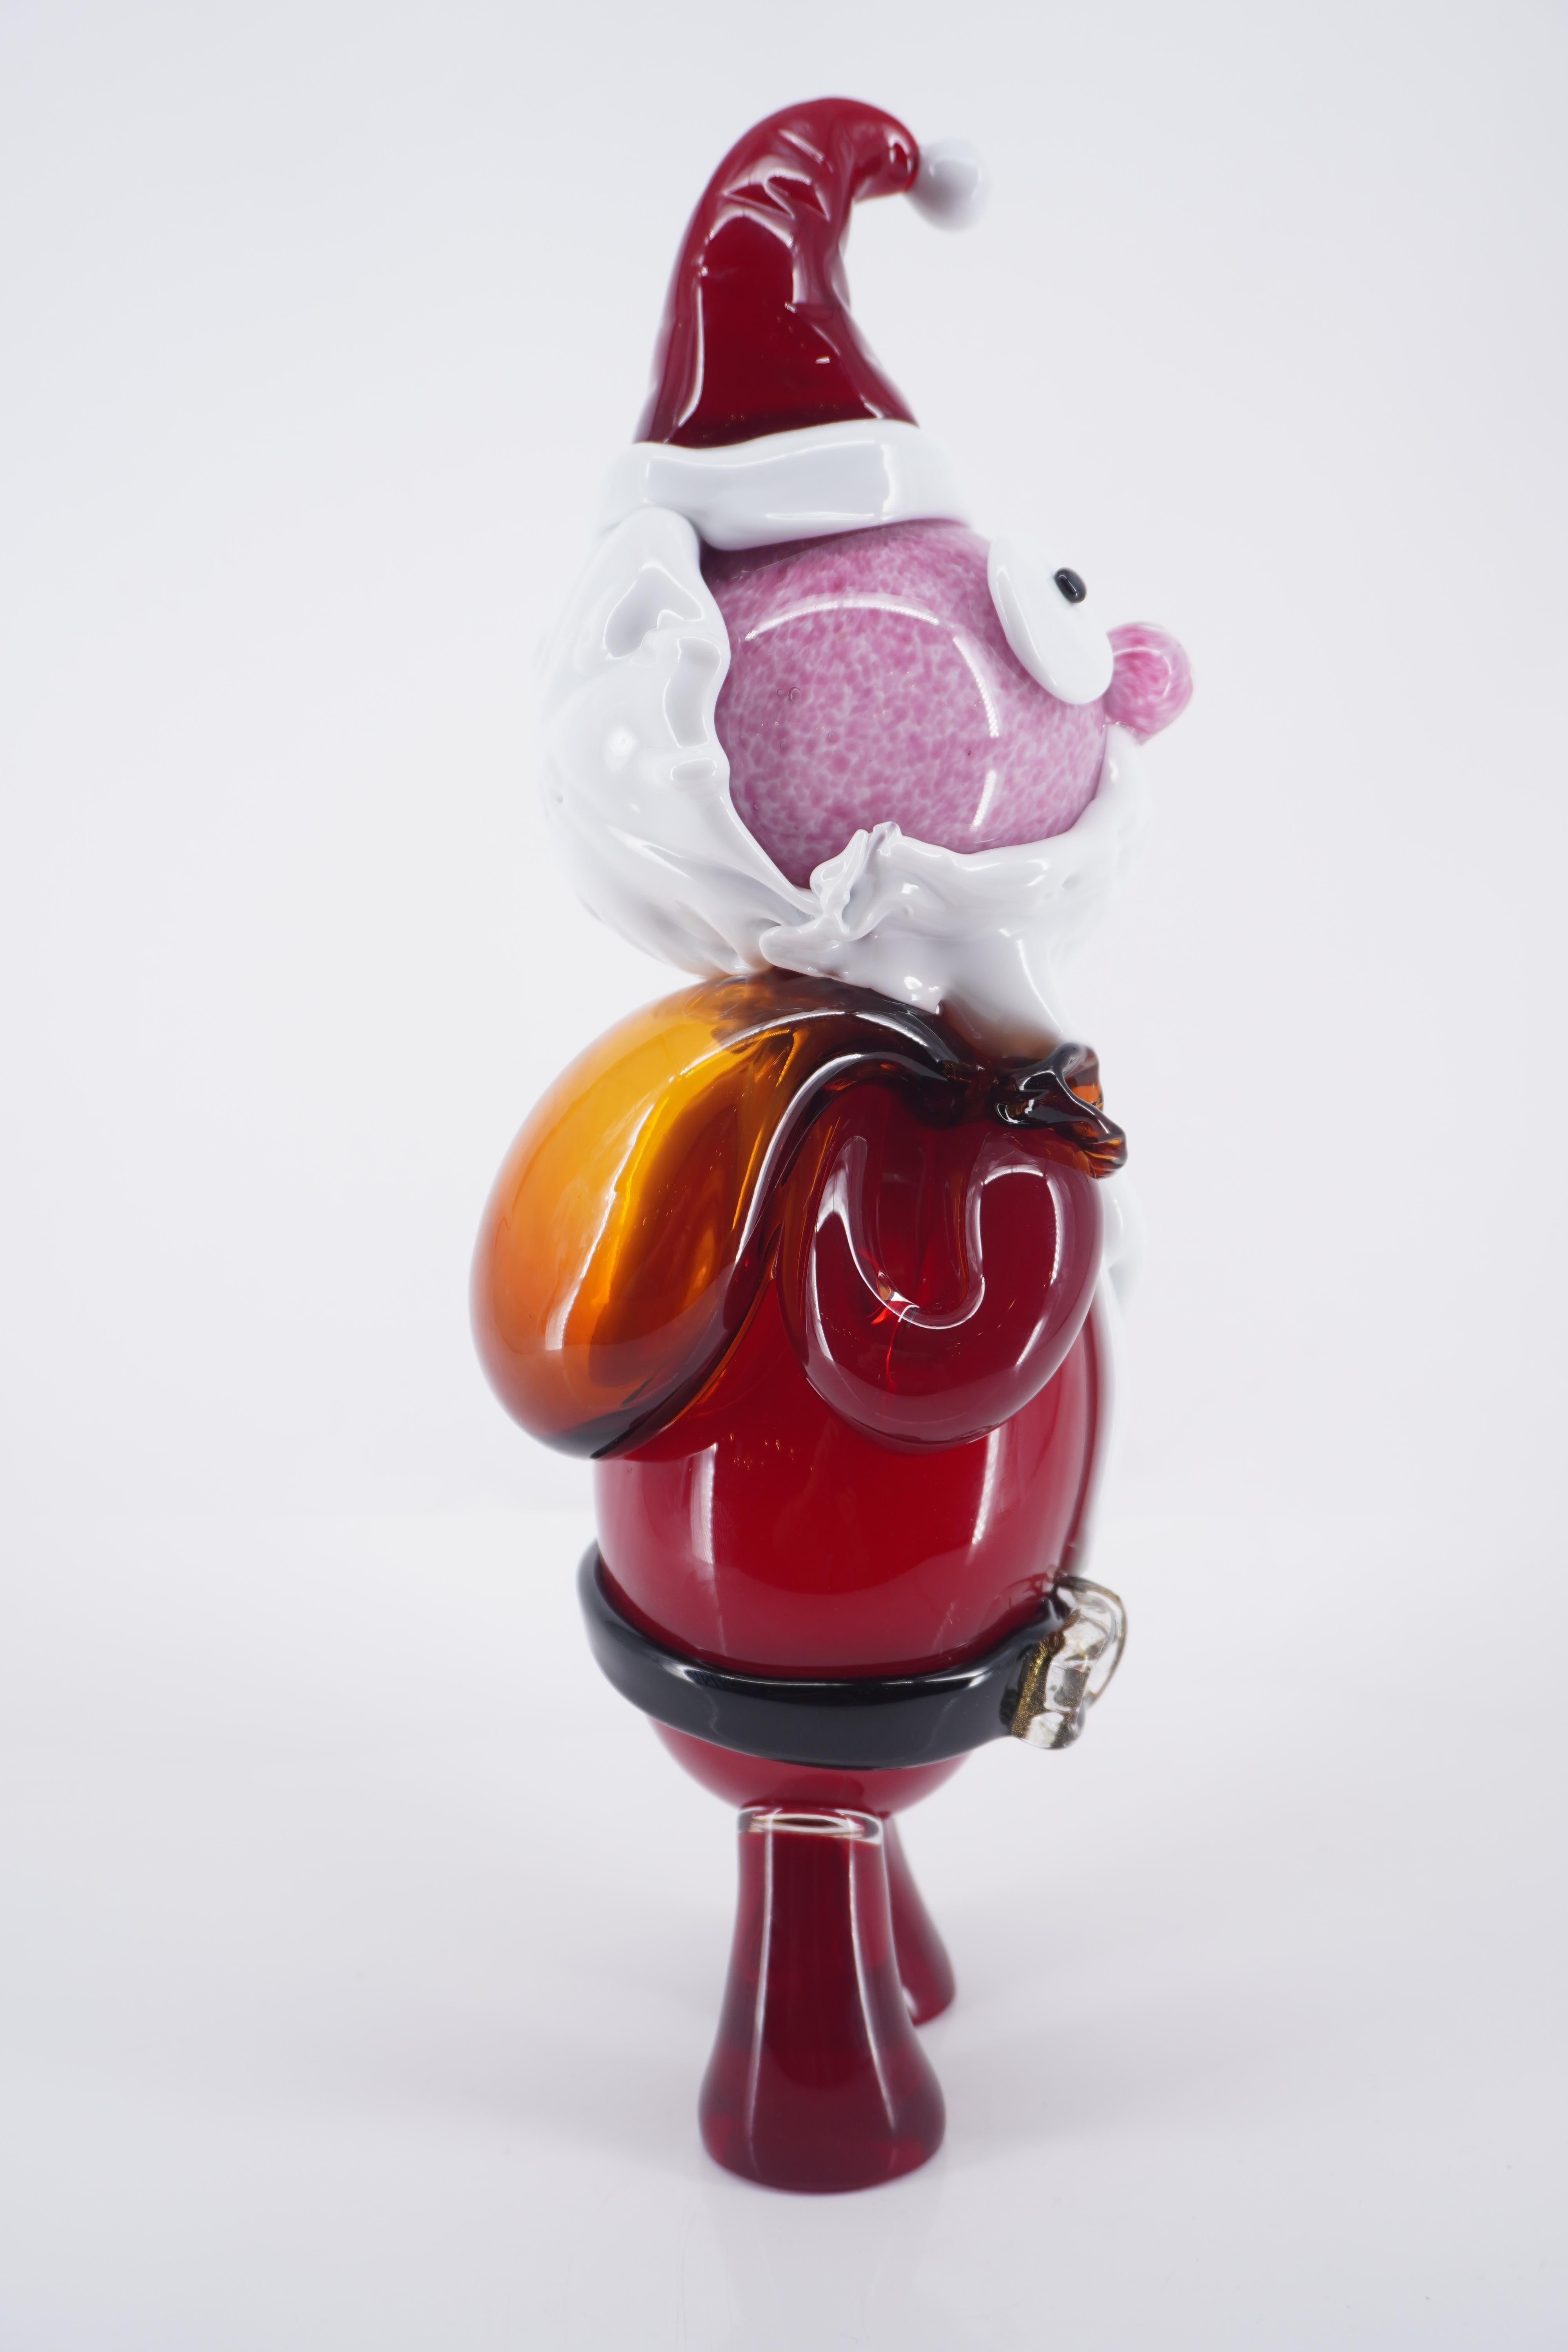 Santa Claus is a blown glass a new sculpture created by Roberto Beltrami, in Murano glass,  a tribute to the Chirstmas time.

Part of a comic and pop collection in Murano glass, the 'PUPI' are 100% mouth-blown and entirely handmade, offering